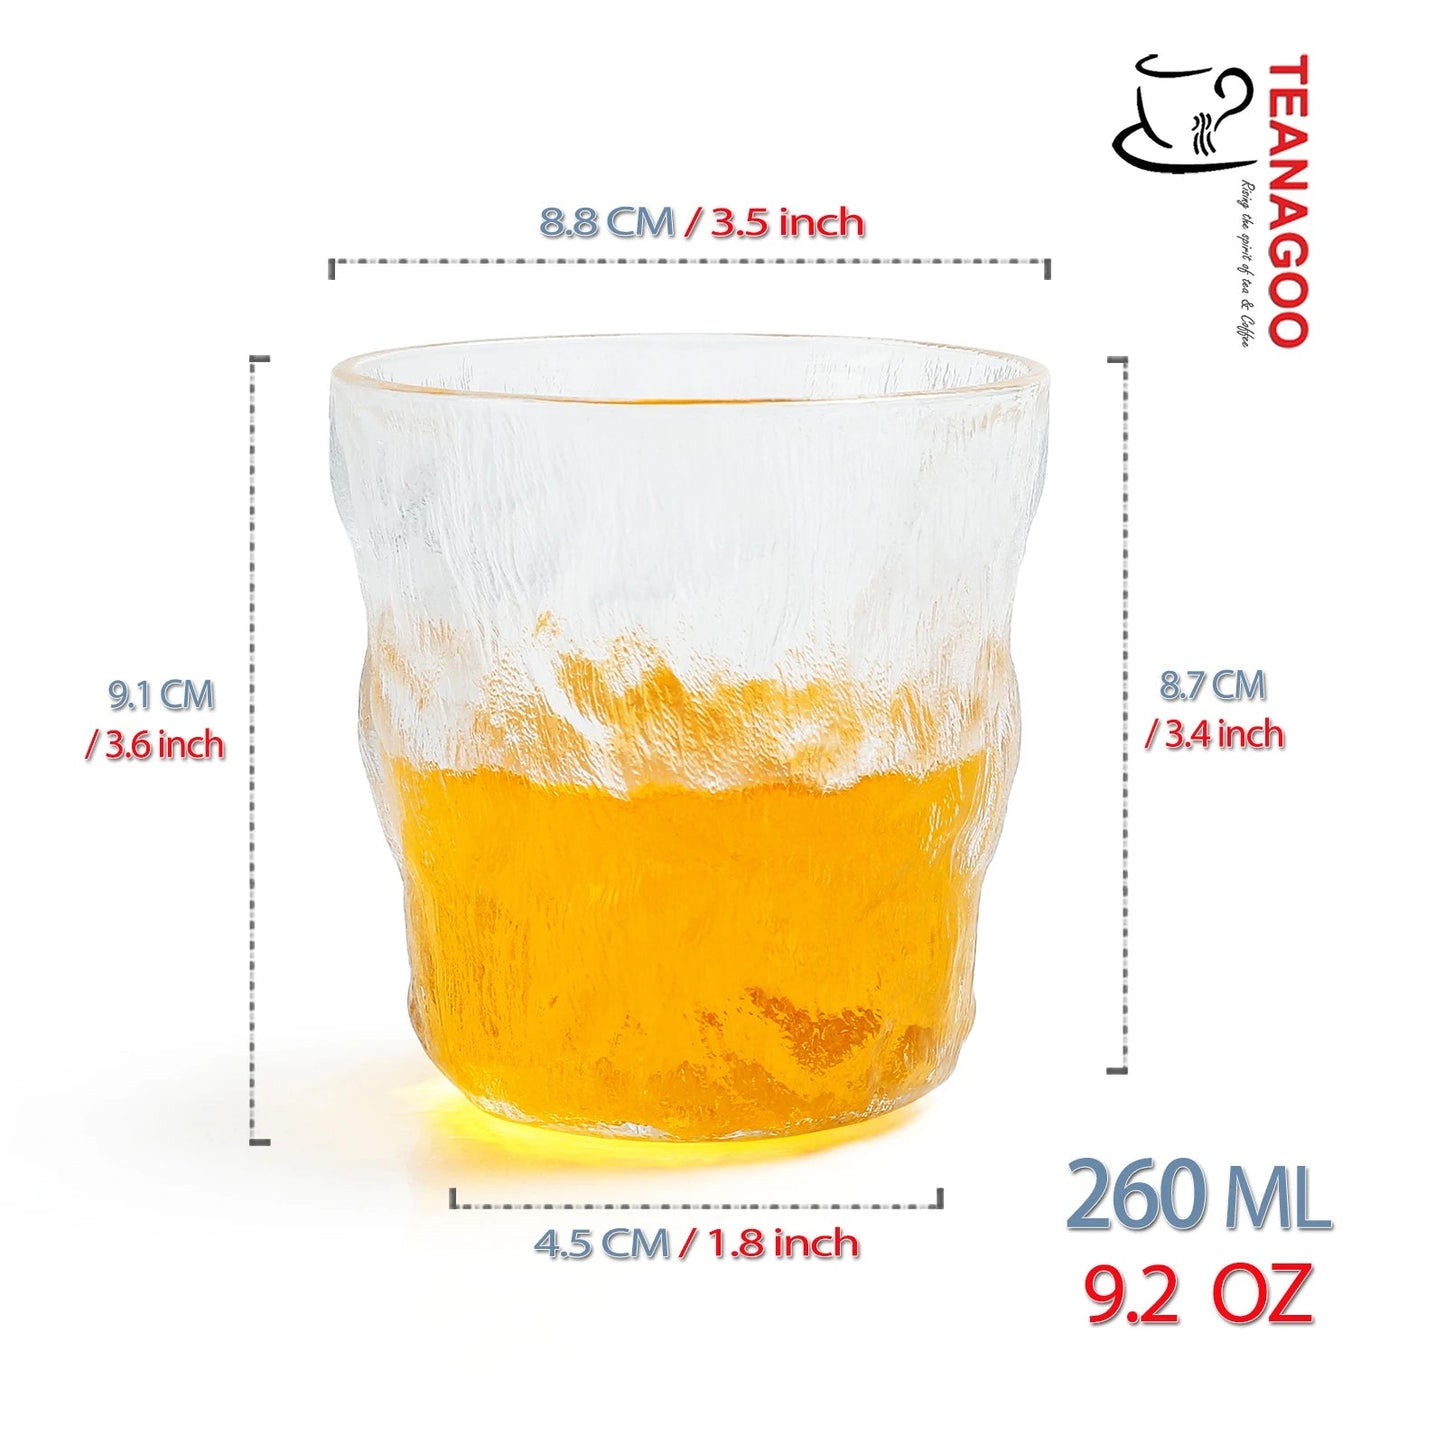 Thick Anti-Heat Glass Tea Cup Handcrafted Gongfu Teaware